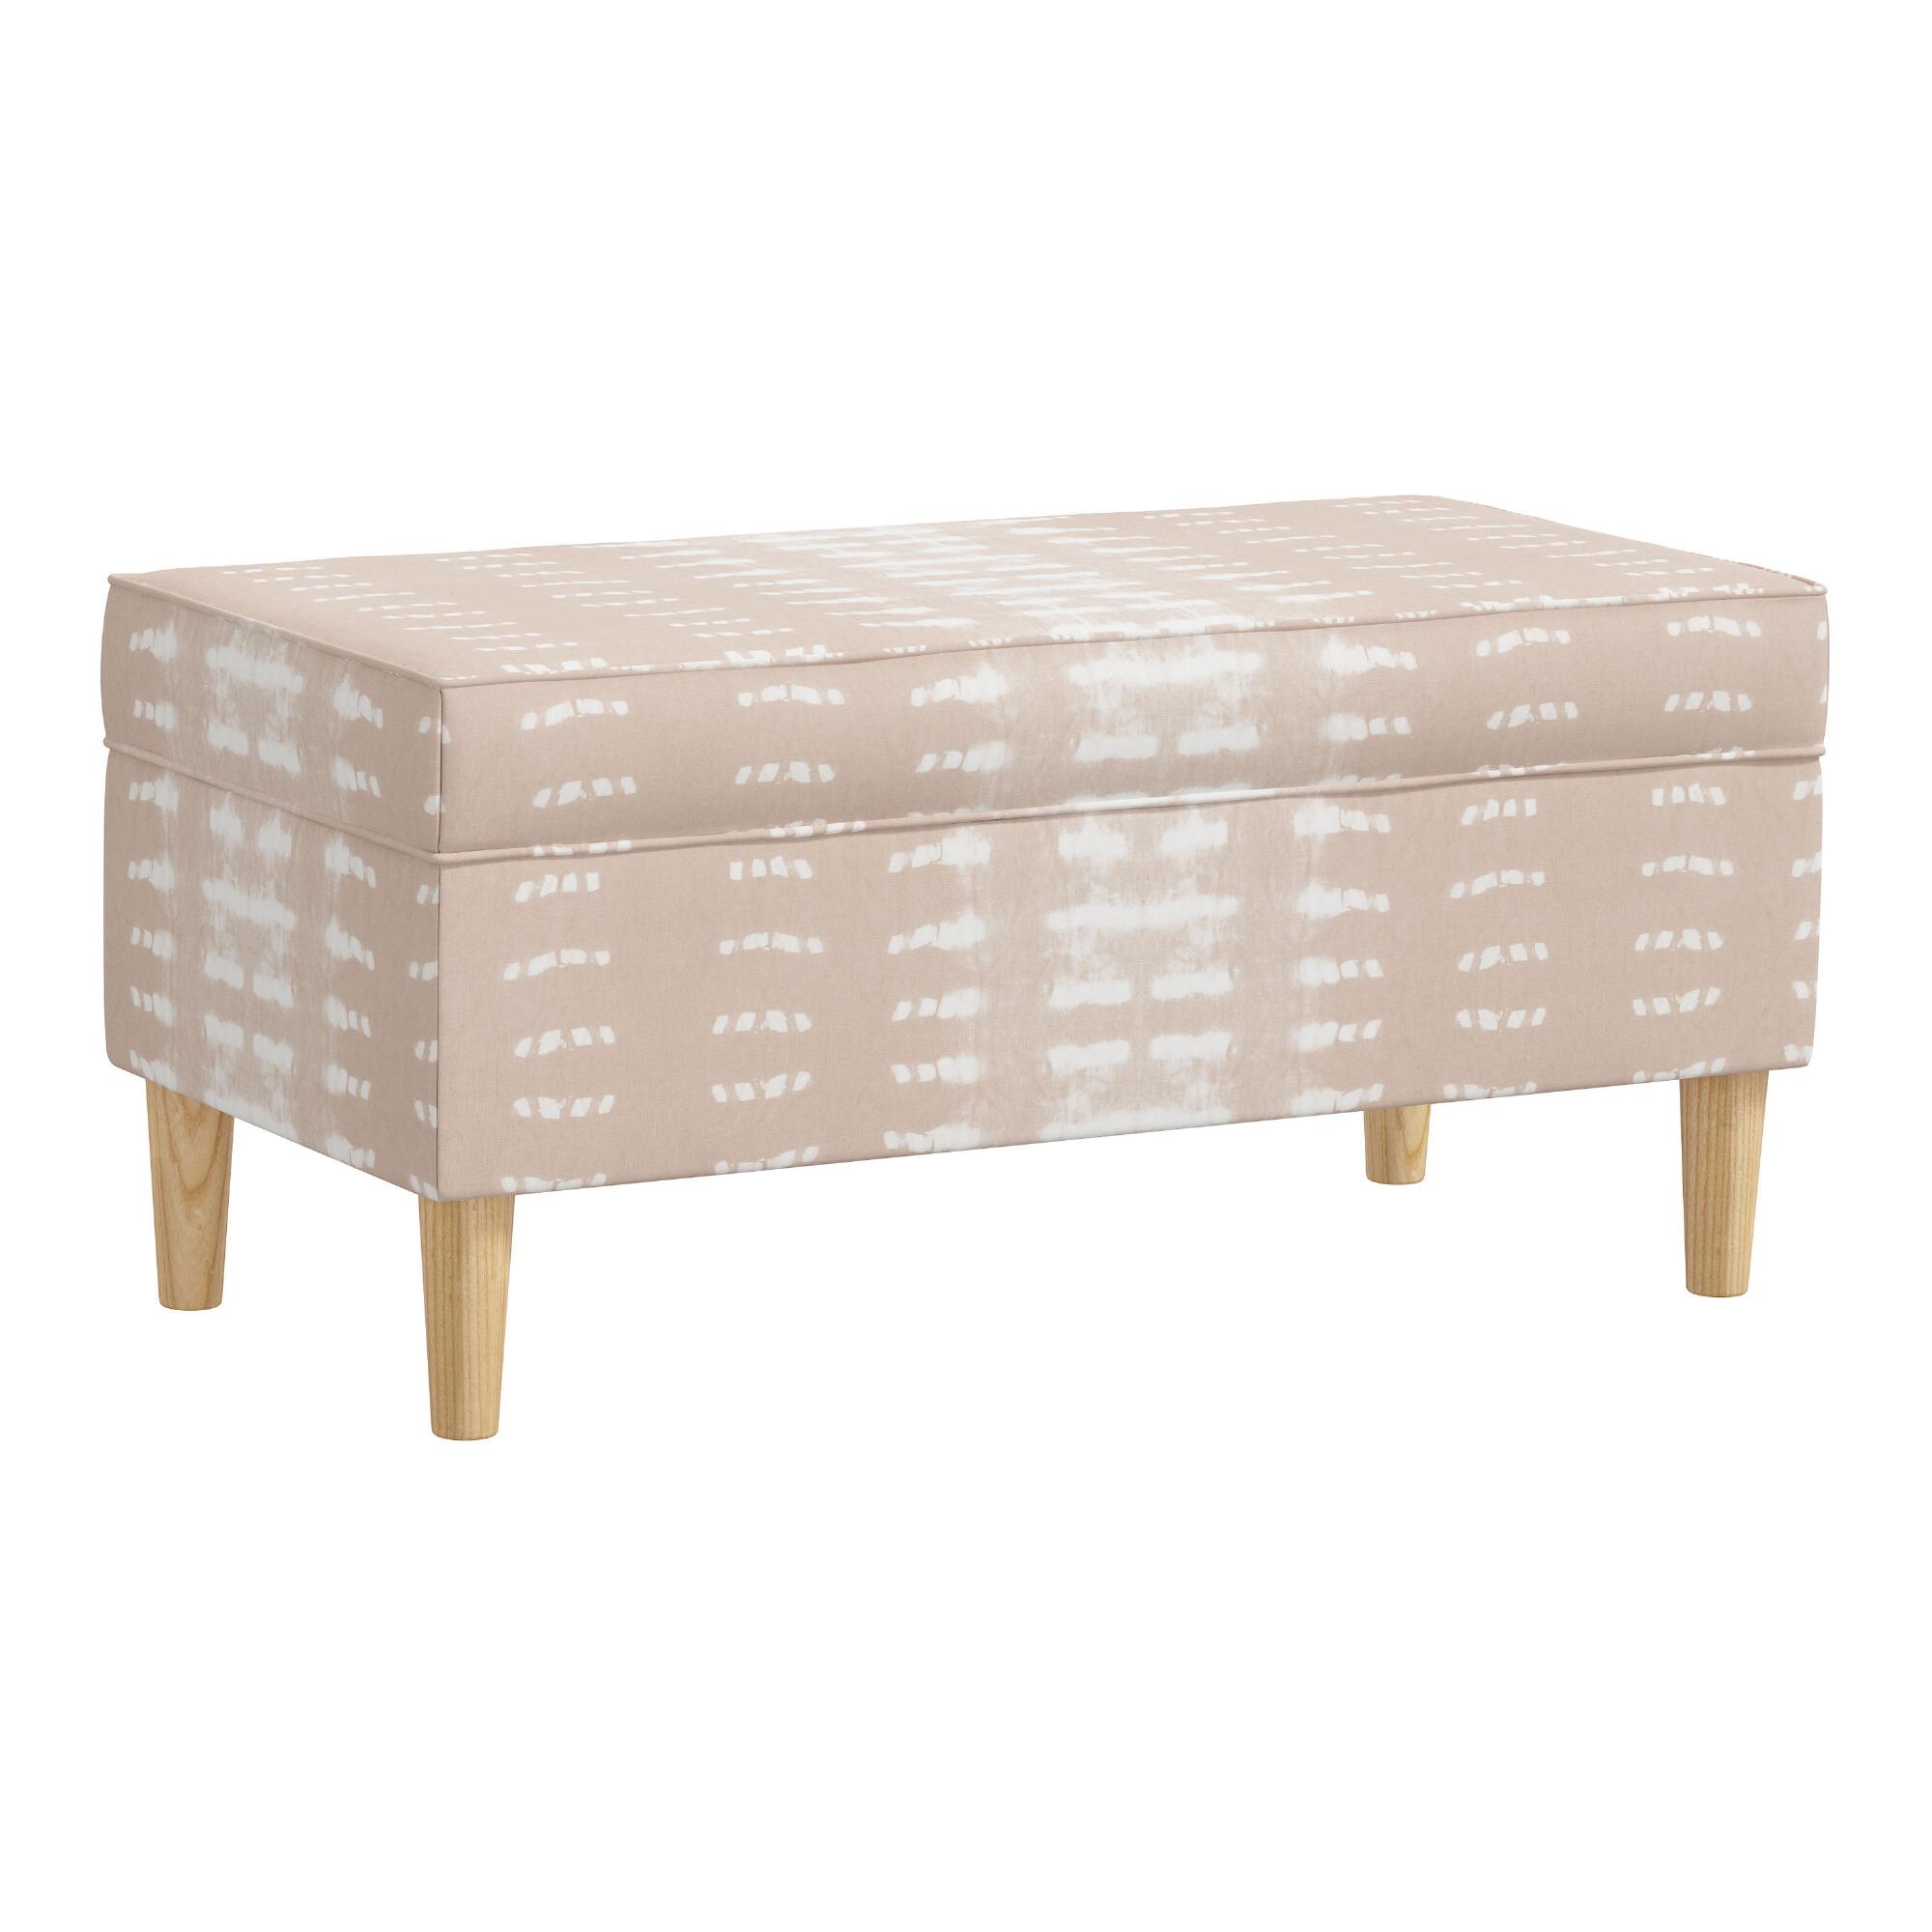 Print Tabitha Upholstered Storage Bench: Gray by World Market